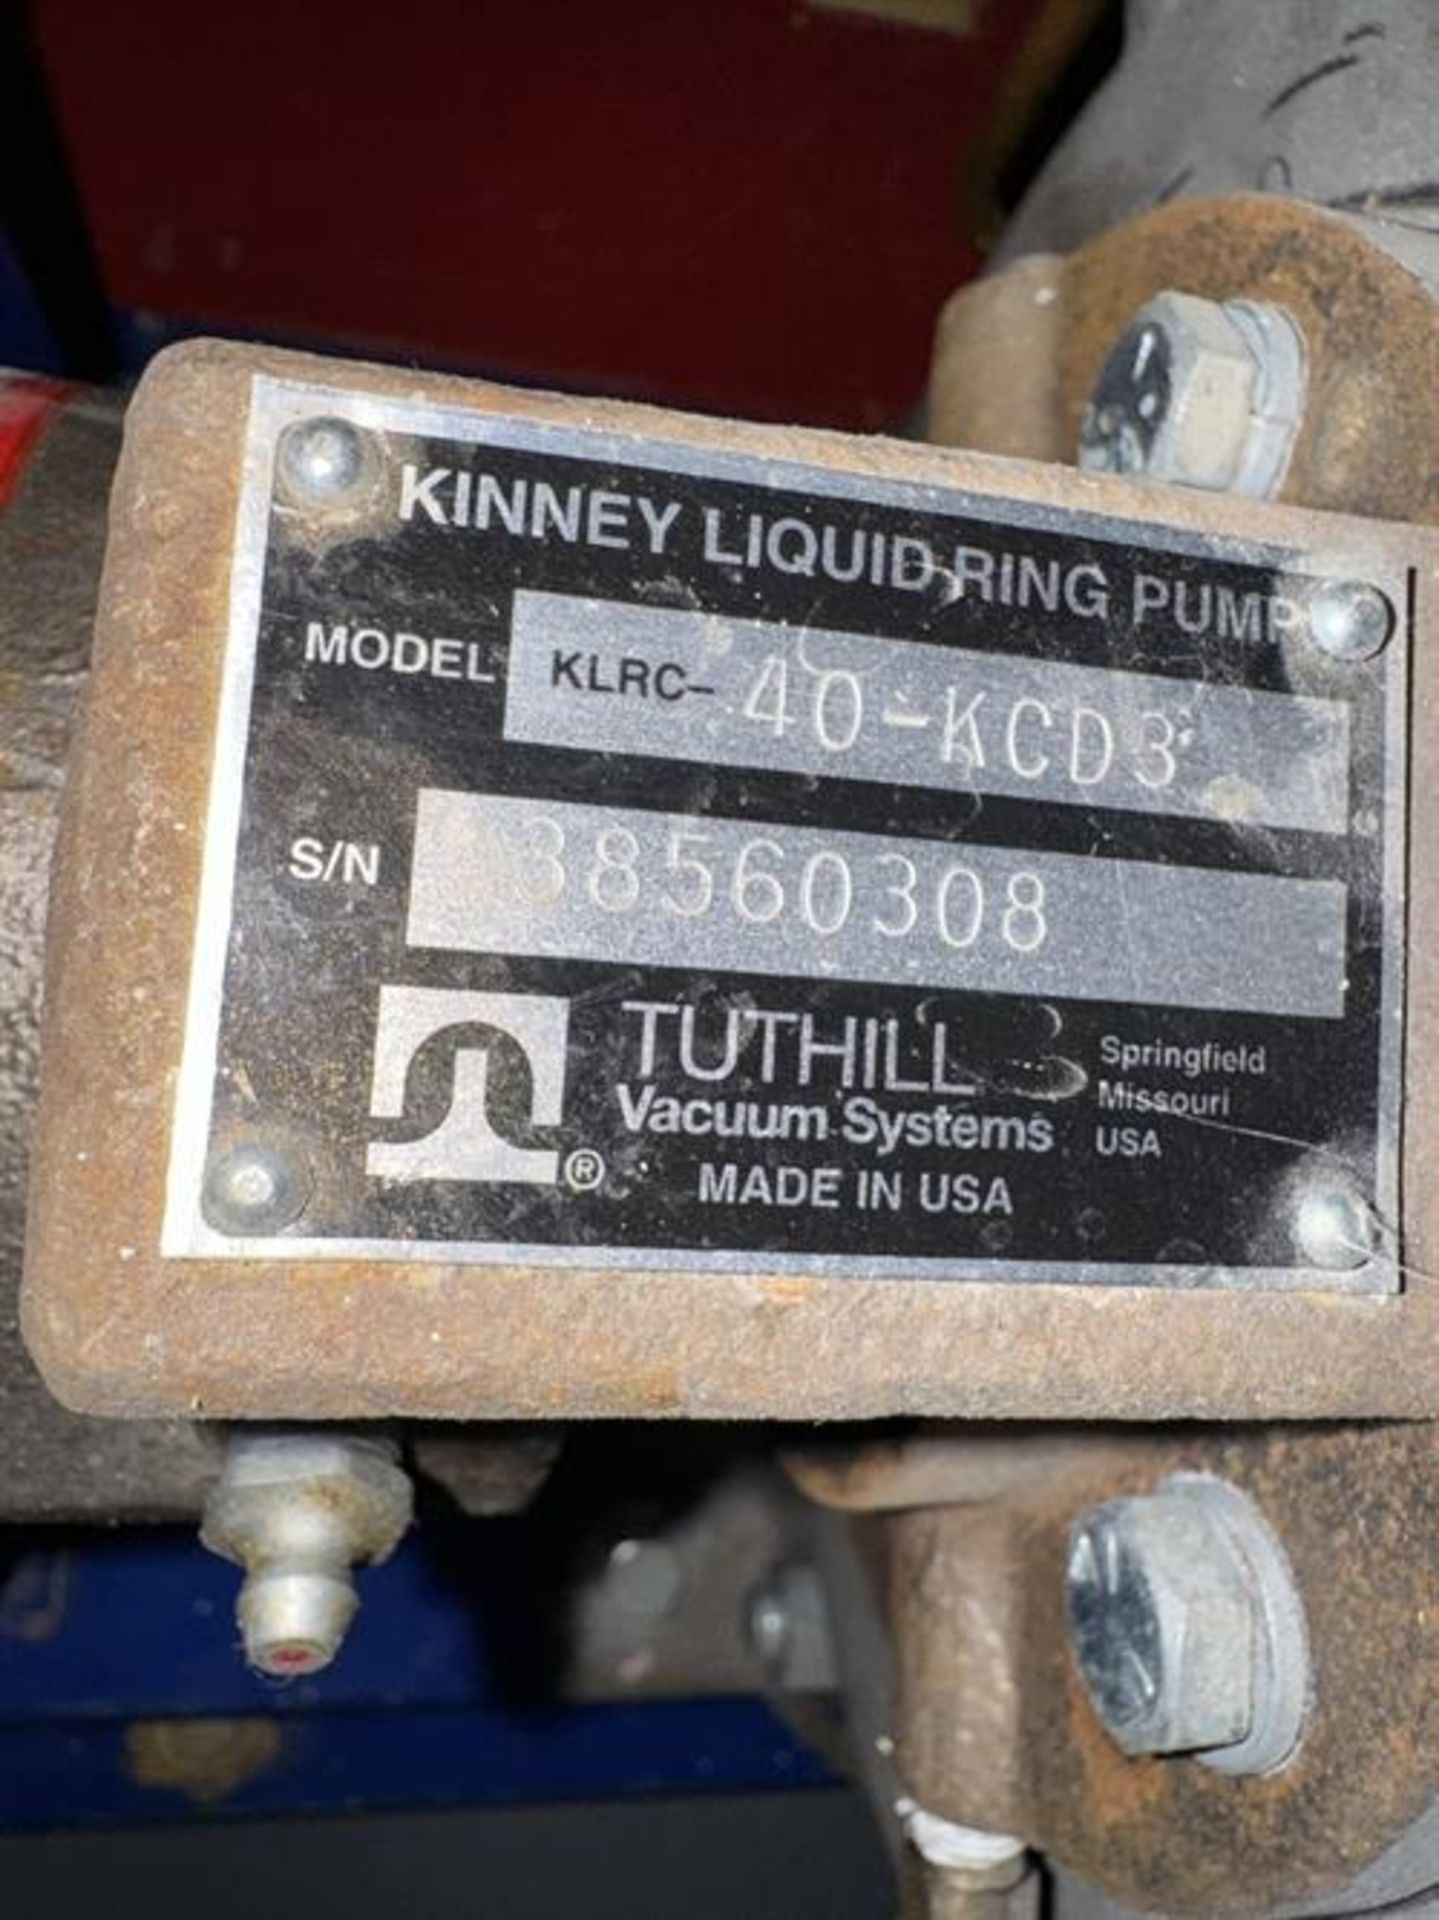 Kinney model KLRC-40-KCD3 two stage liquid ring vacuum pump - Image 6 of 6